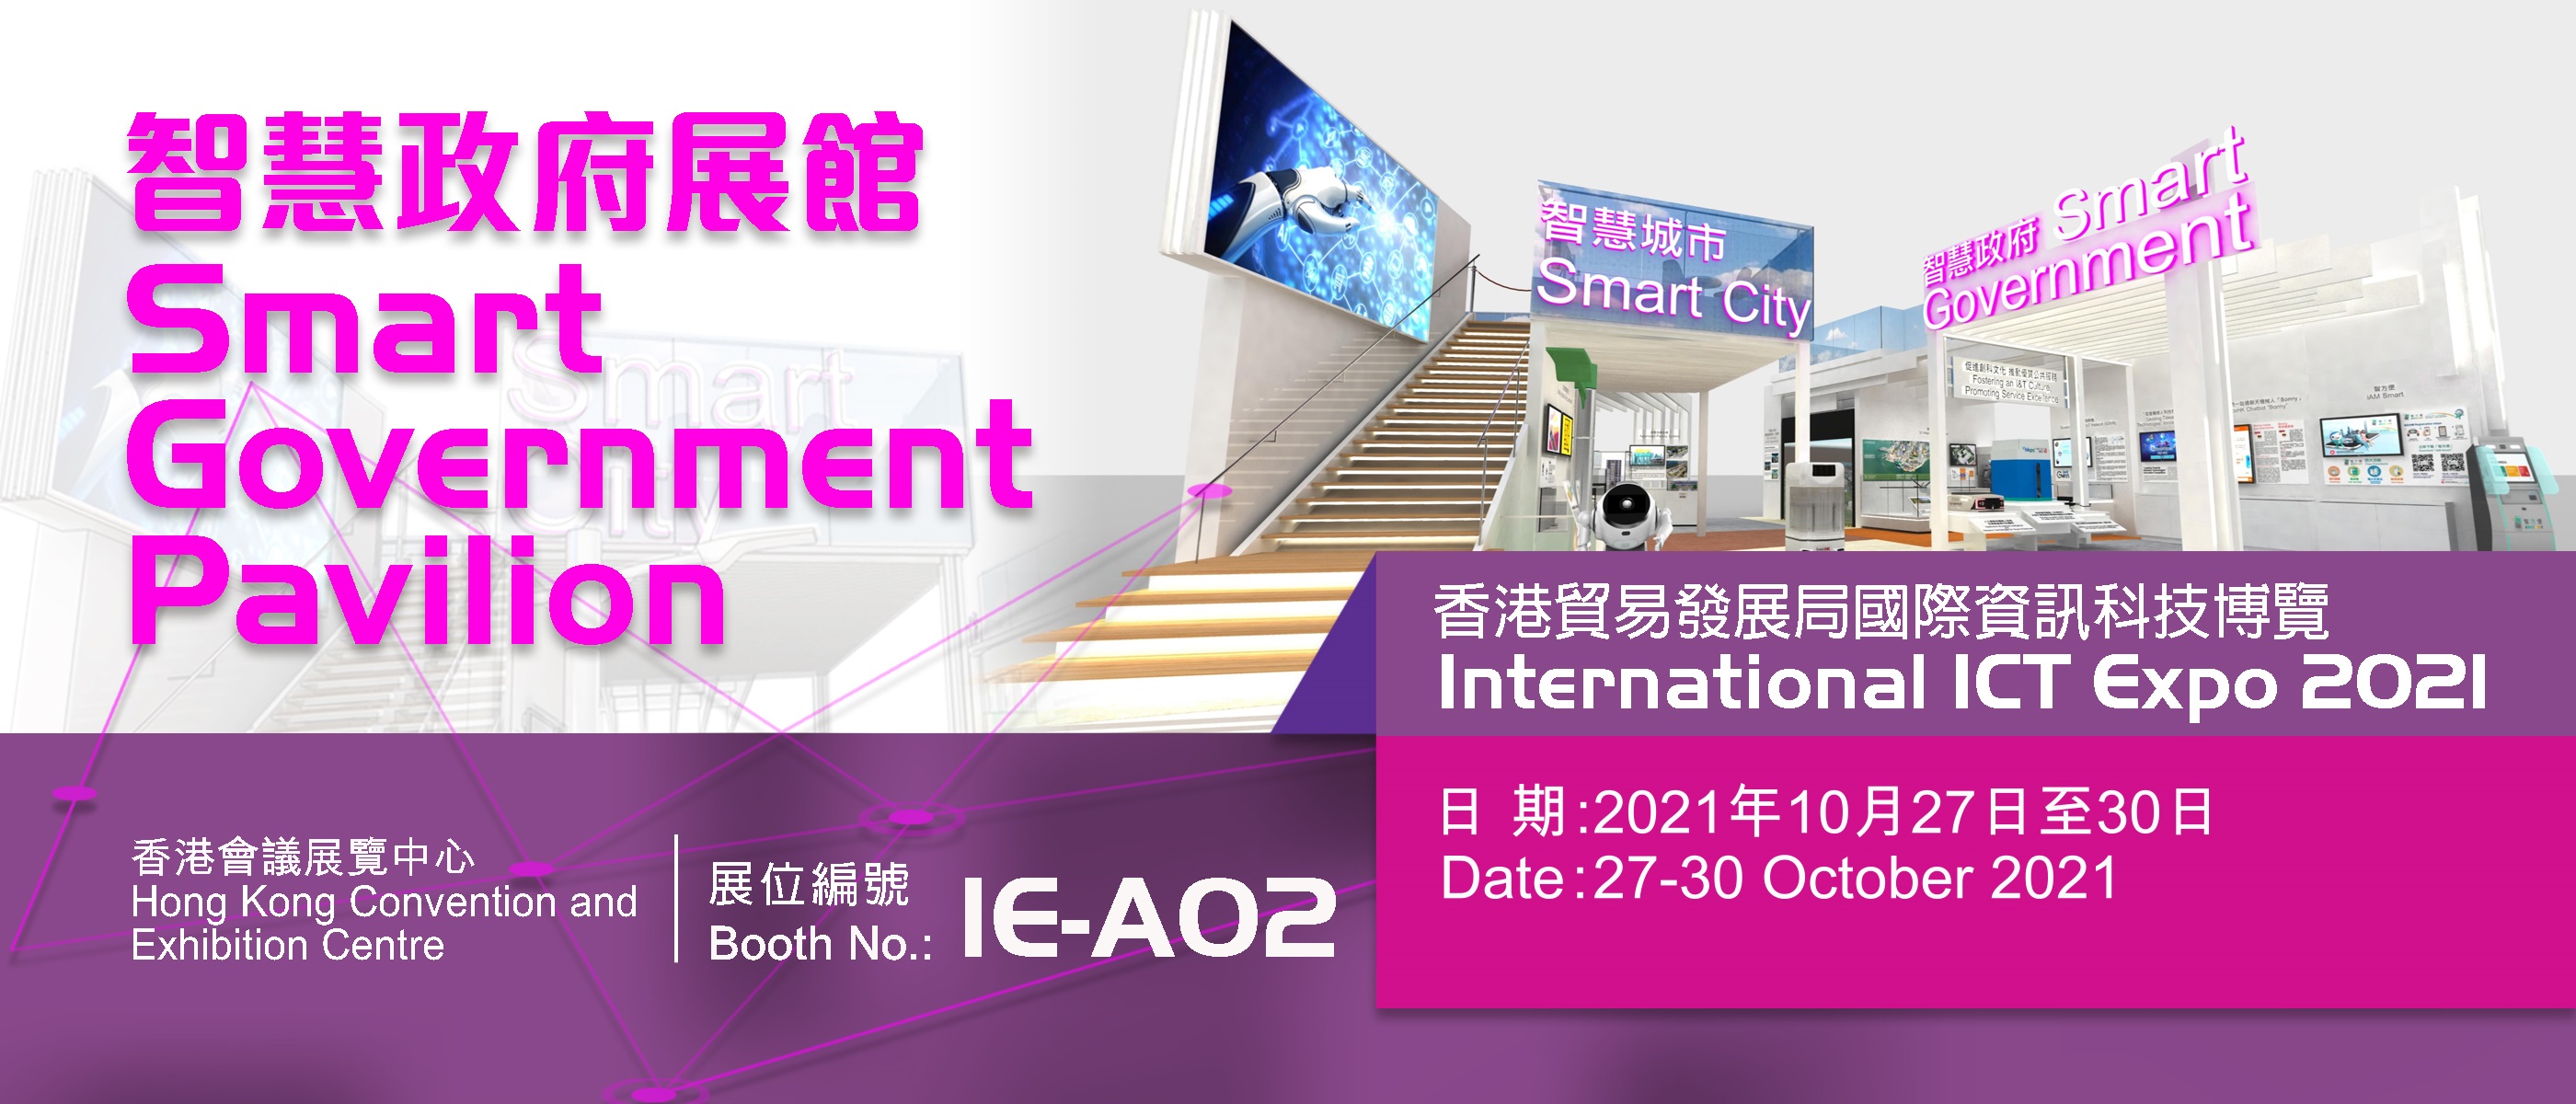 Smart Government Pavilion at the ICT Expo 2021